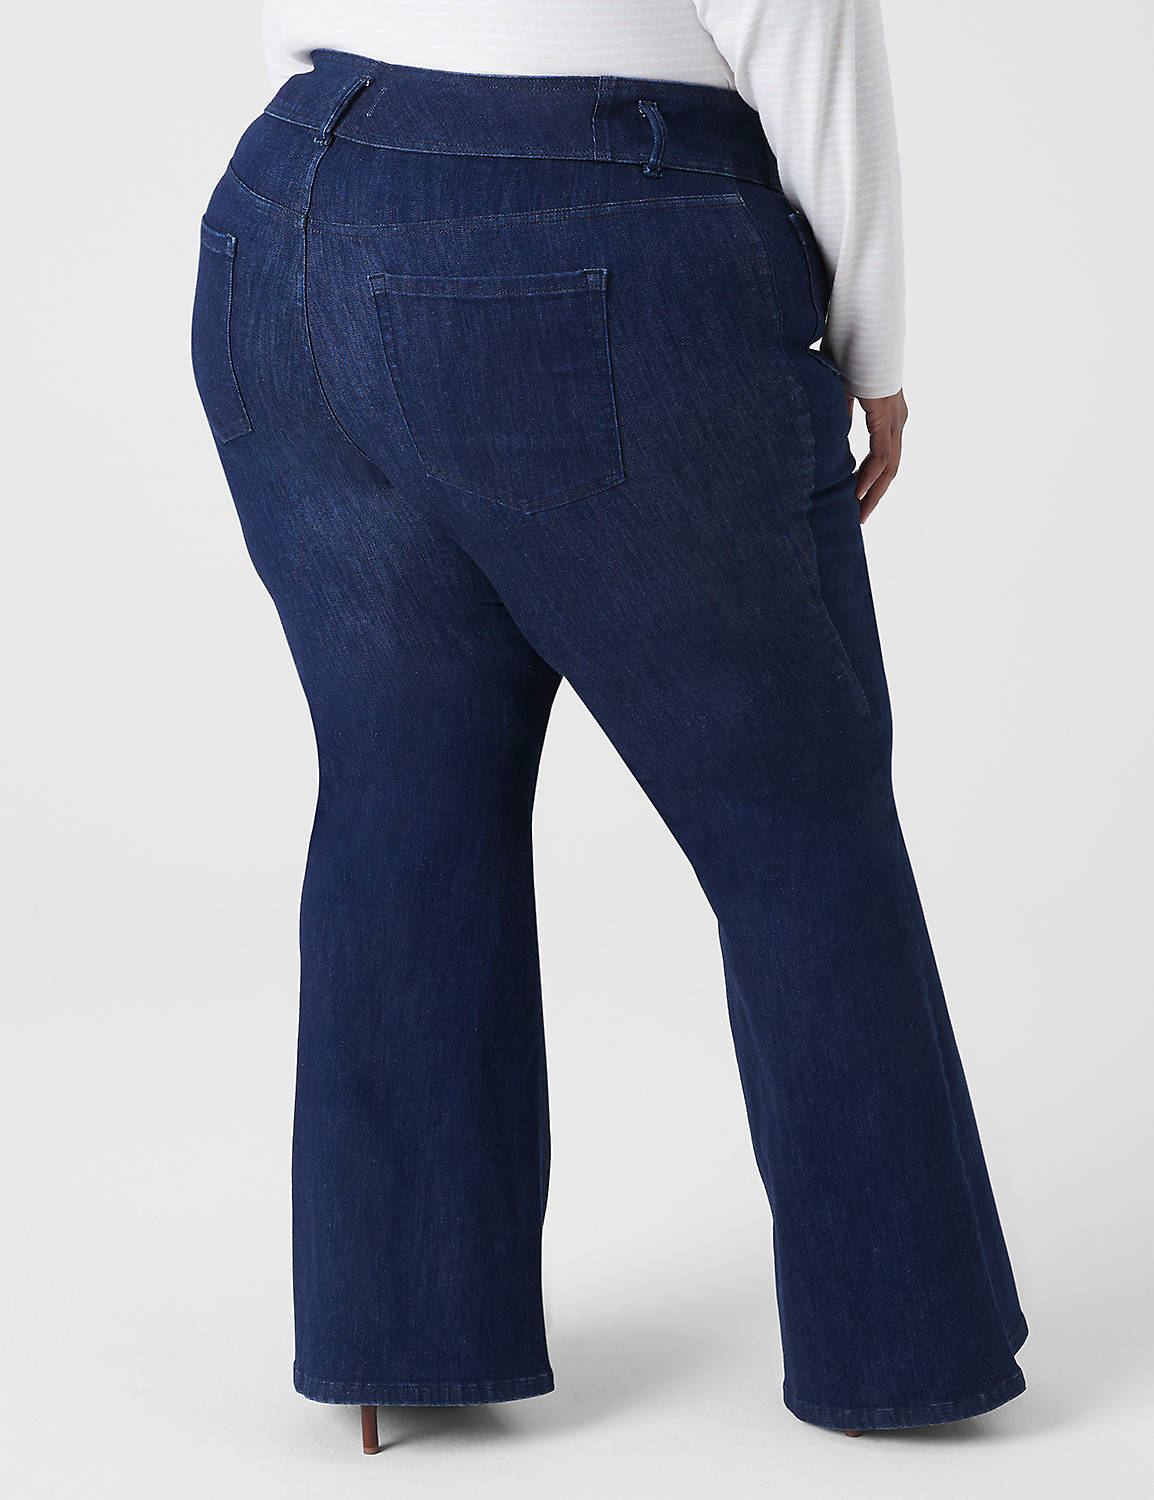 ULTRA HIGH RISE FLARE JEAN  -RINSE Product Image 2